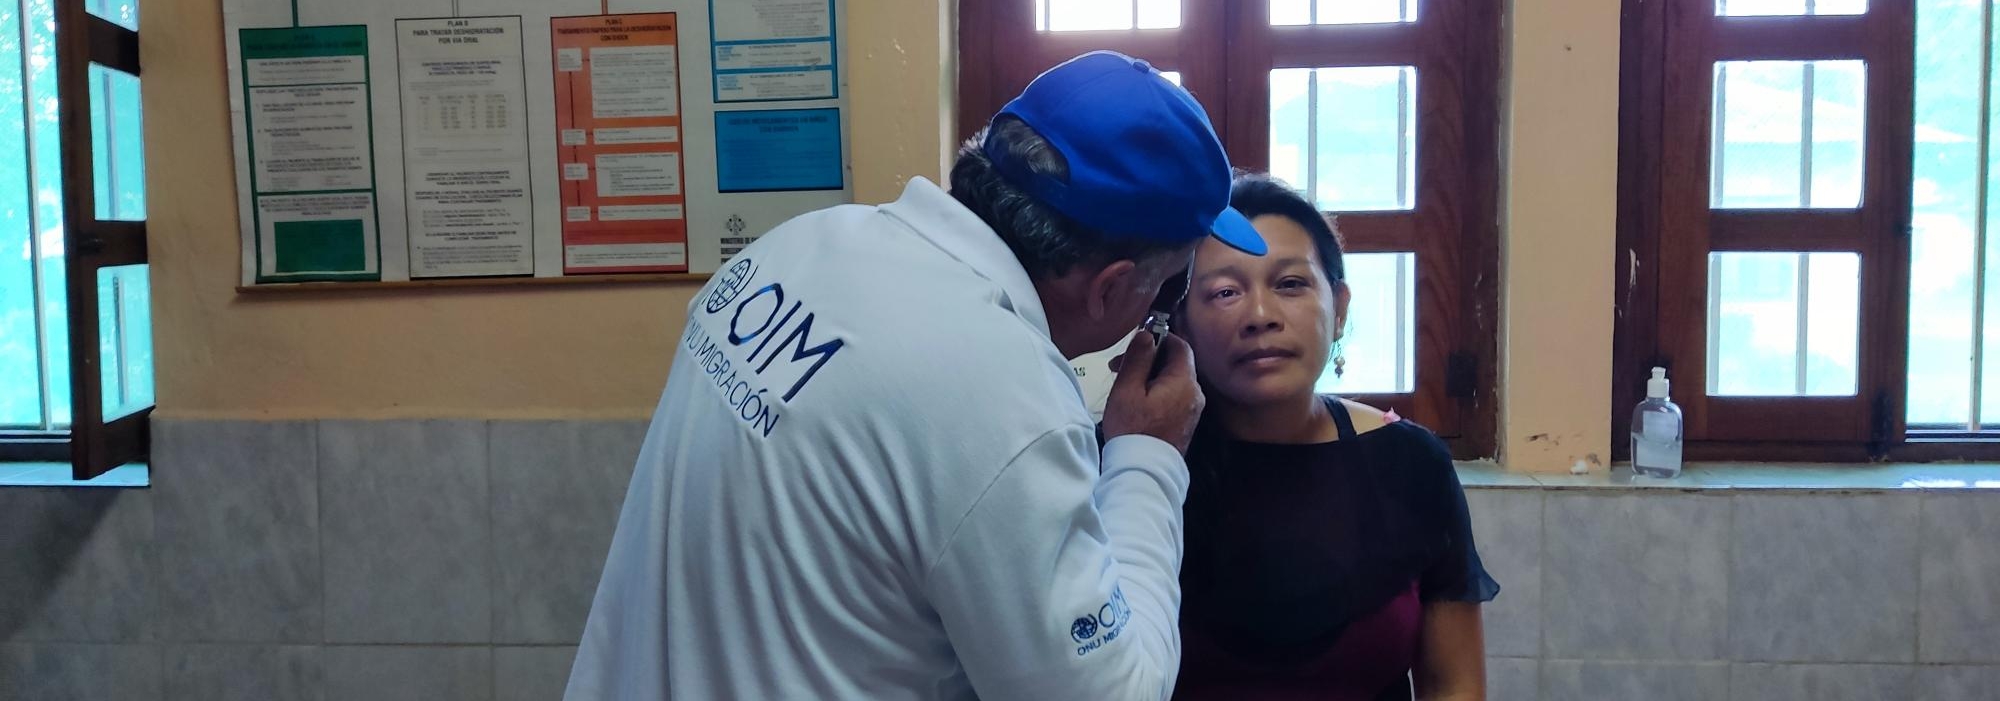 IOM medical consultant providing health care assistance to a woman from an indigenous community in Gran Sabana municipality, Bolivar State. © IOM 2022 / Maria Fernanda Borges